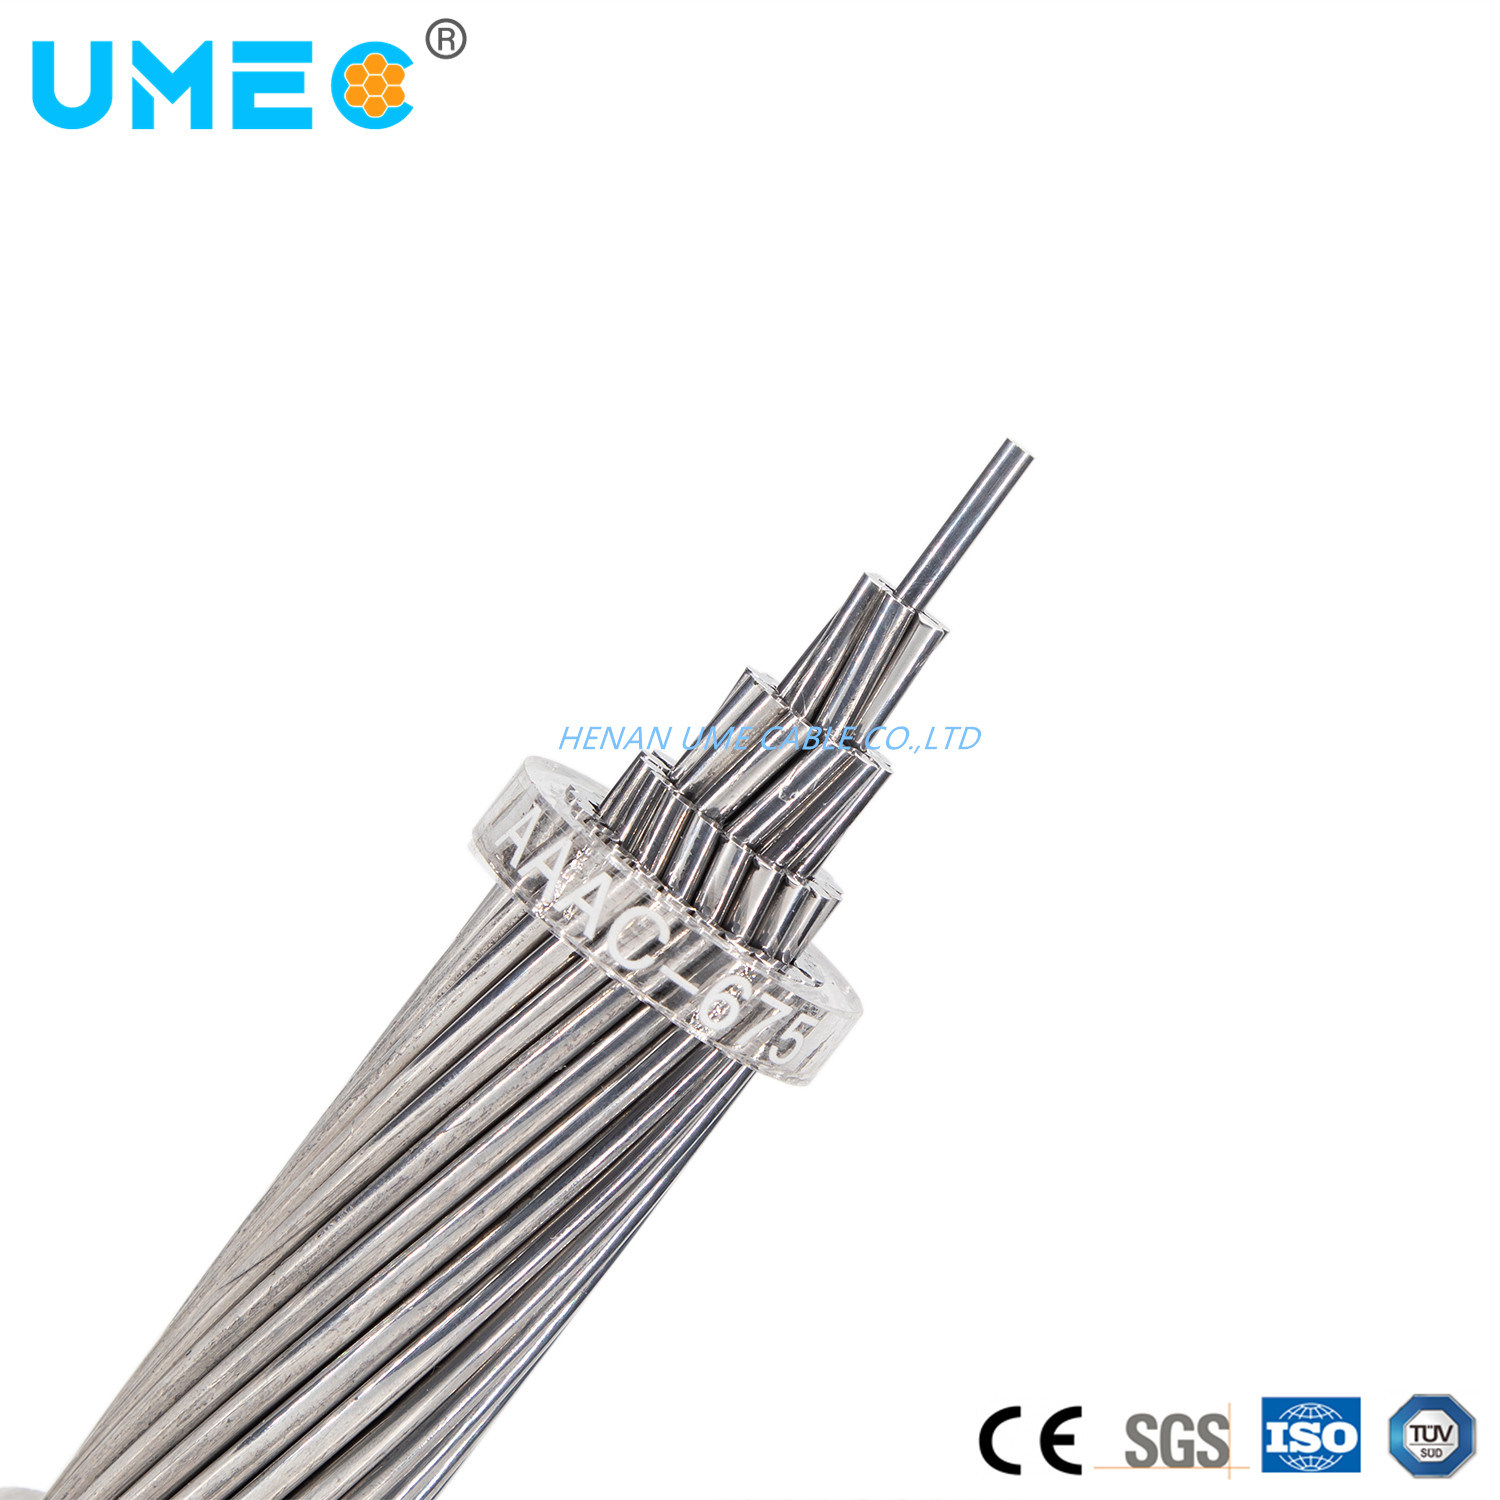 Overhead Transmission Line All Aluminum Conductor Bare AAC Conductor